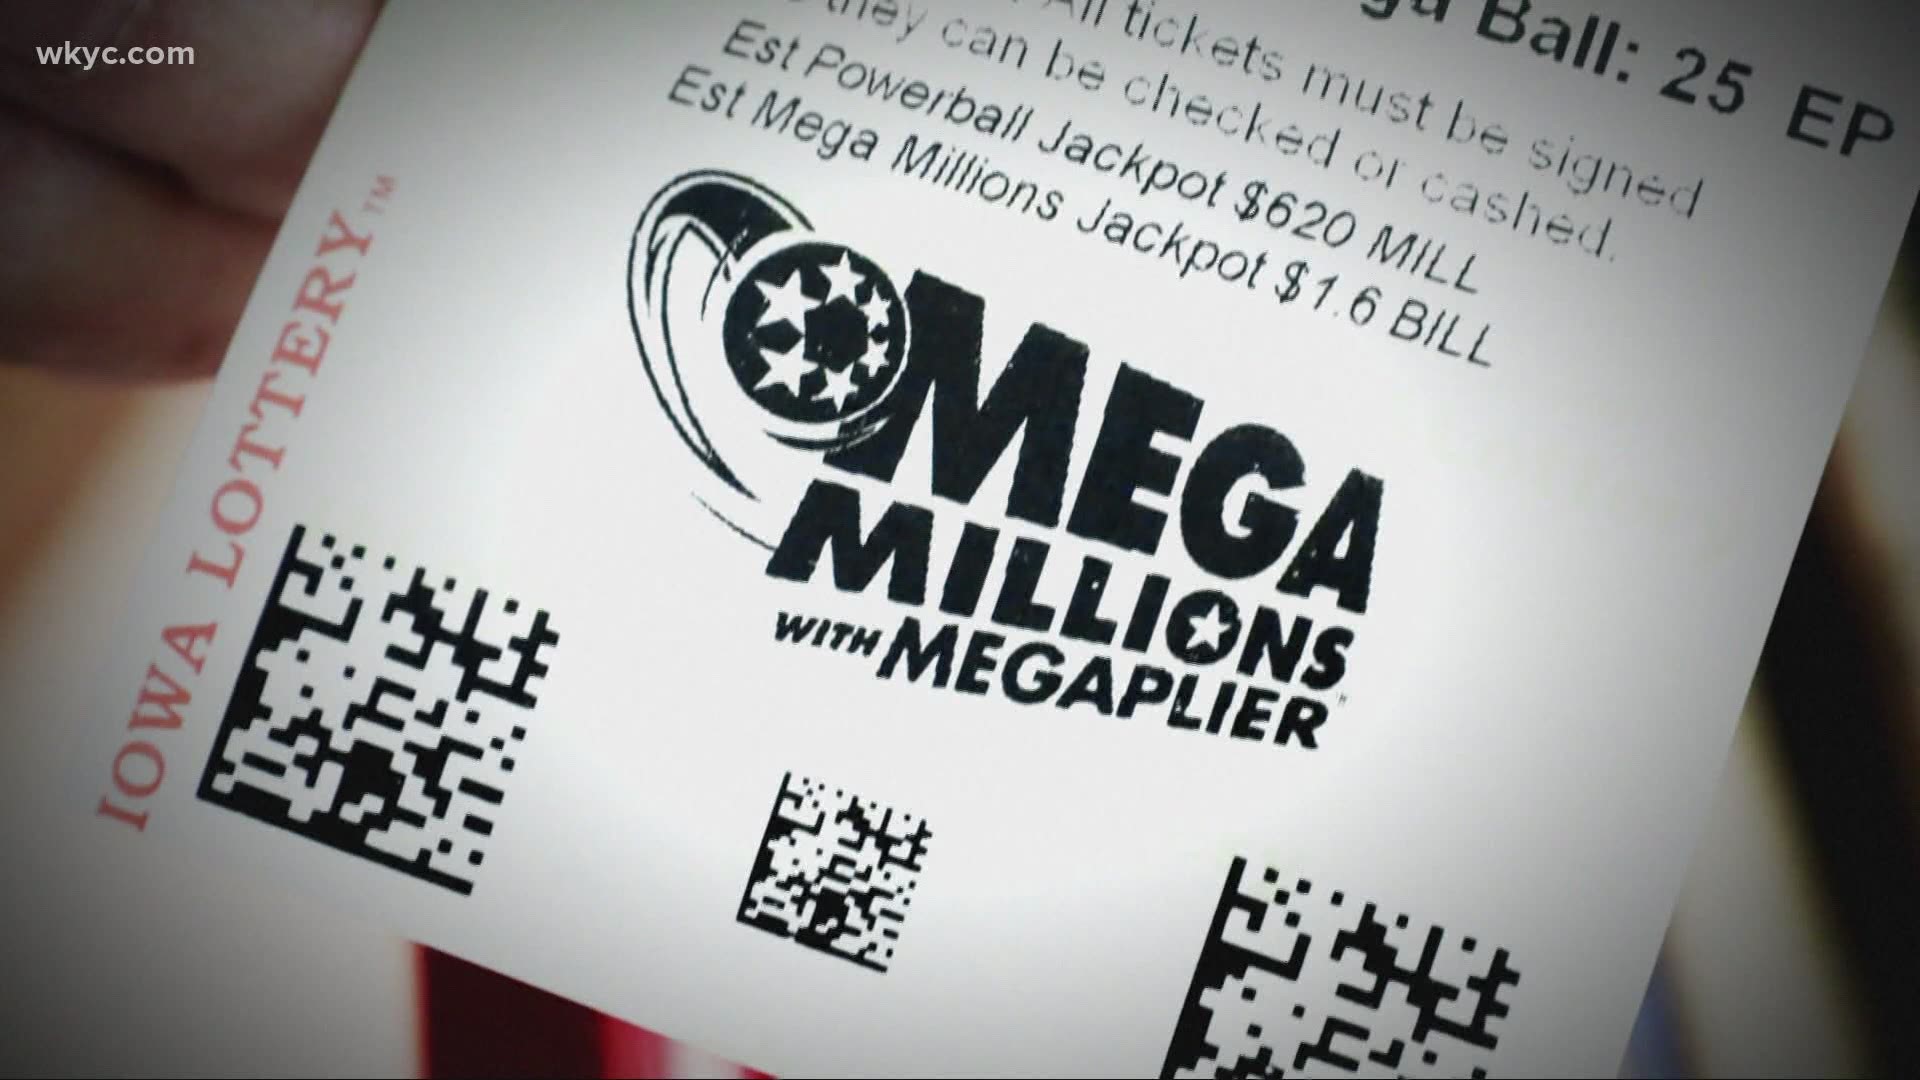 July 1, 2020: There's a new millionaire in Northeast Ohio! Lottery officials say a $1 million winning ticket in Tuesday night's Mega Millions drawing was sold.